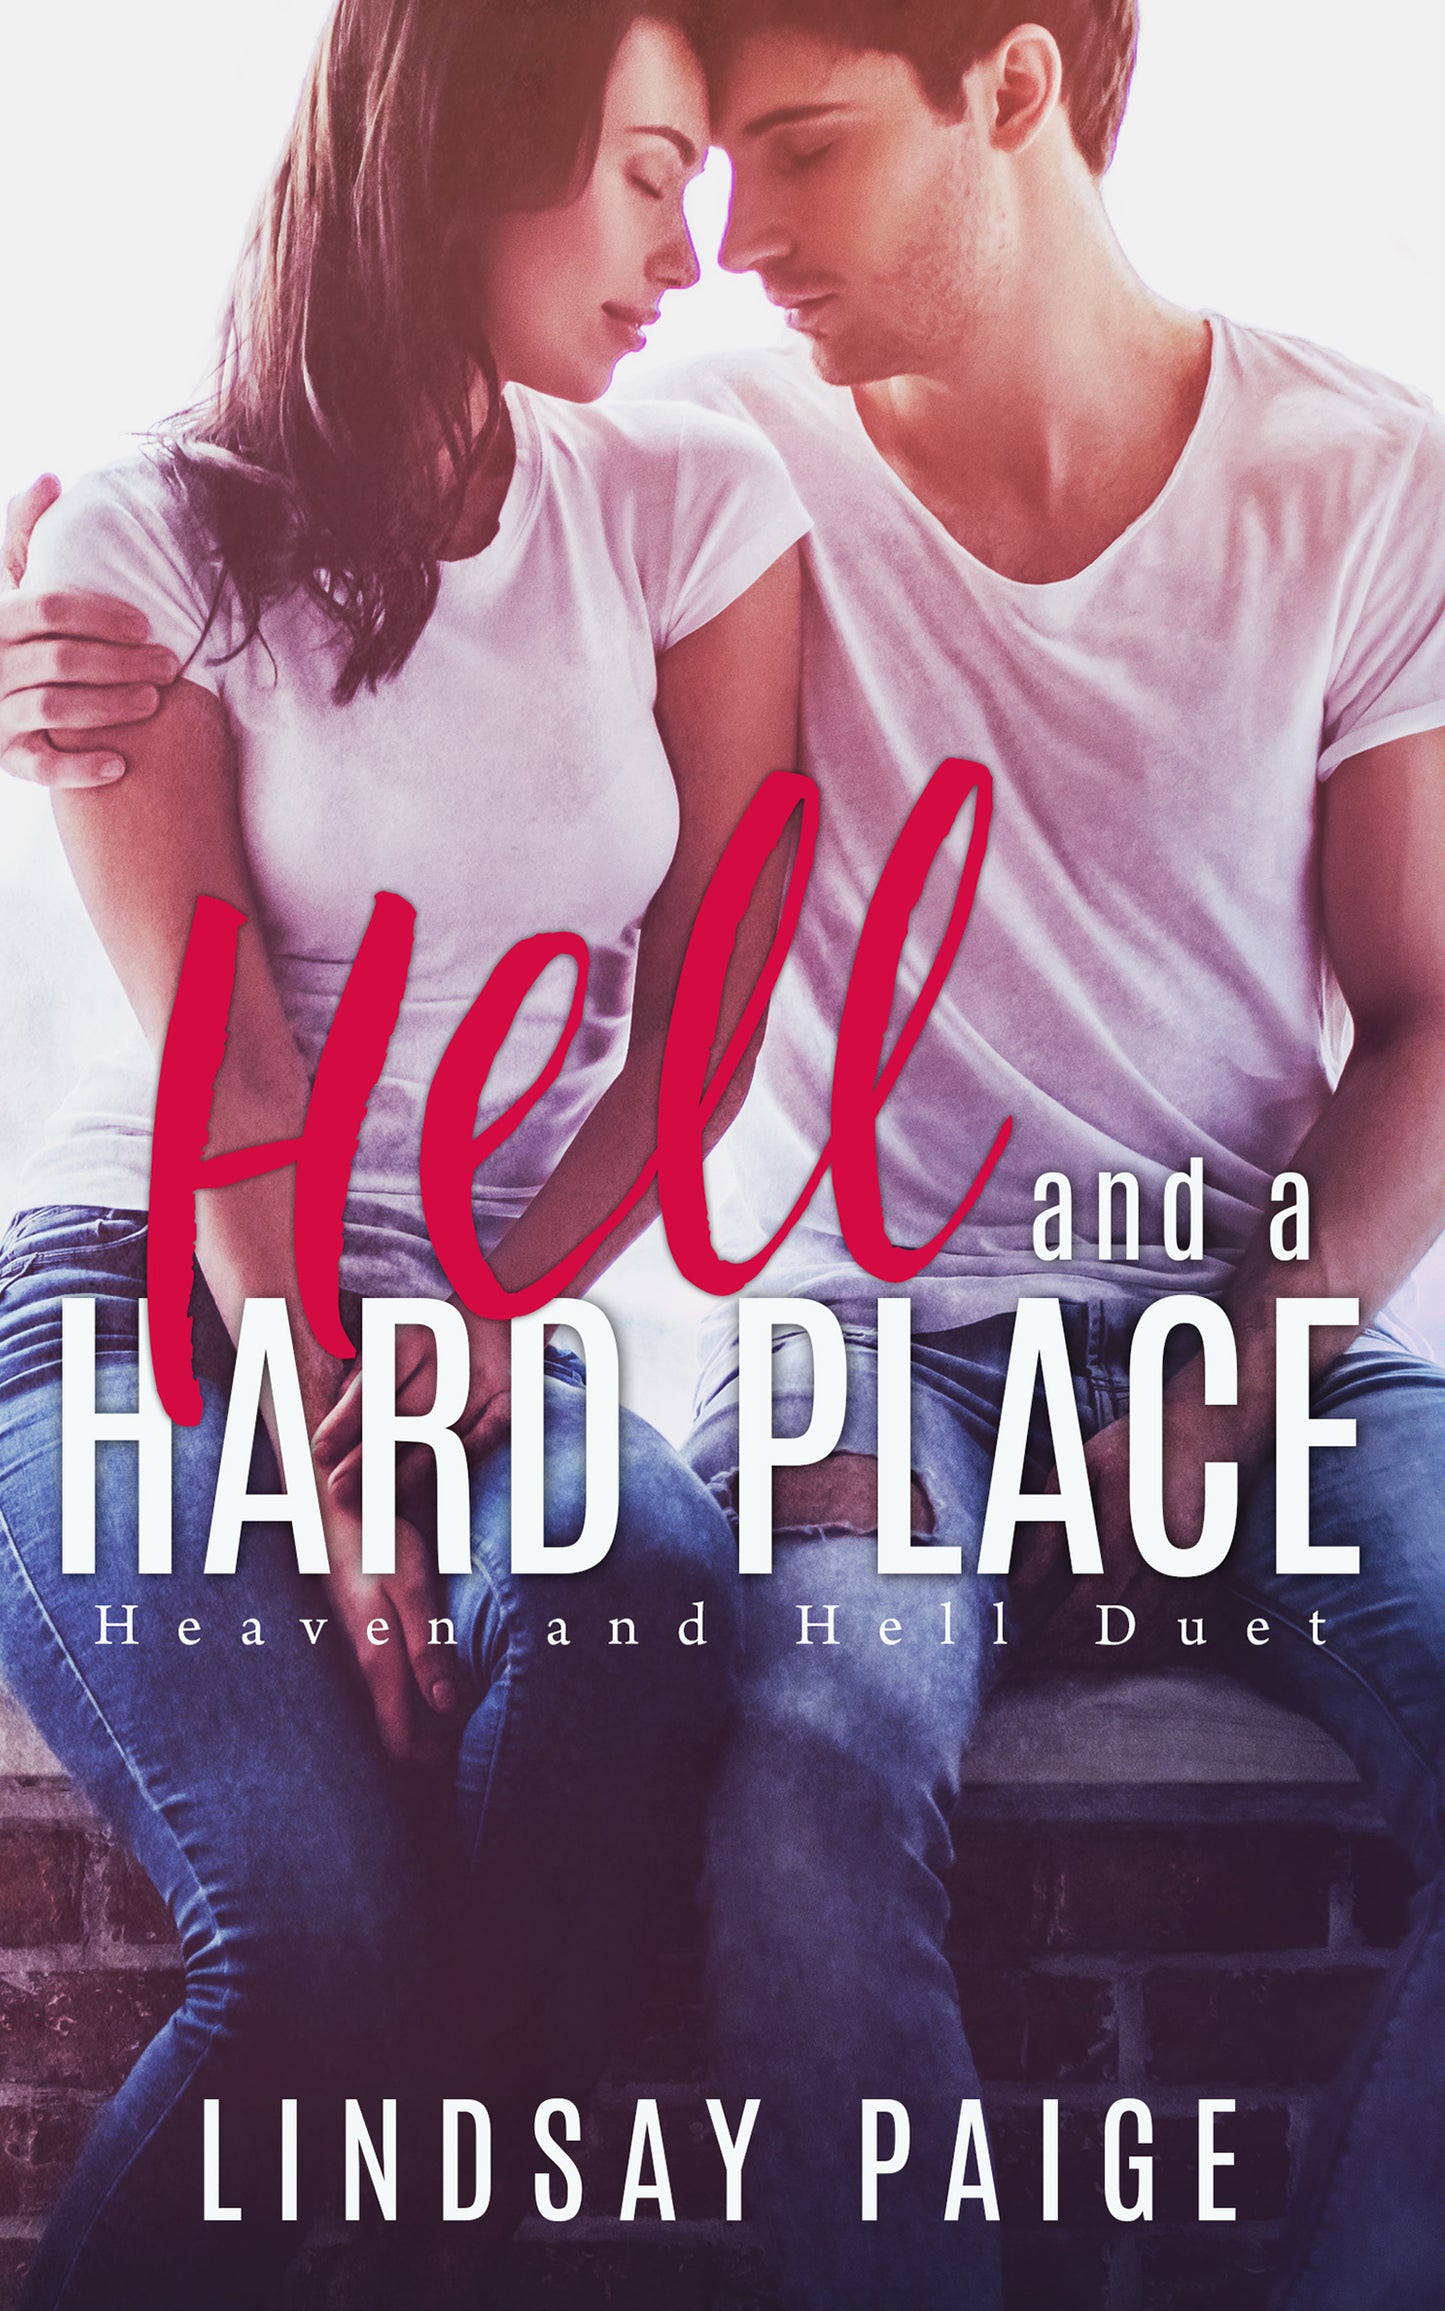 Hell and a Hard Place (Heaven and Hell Duet, #1)